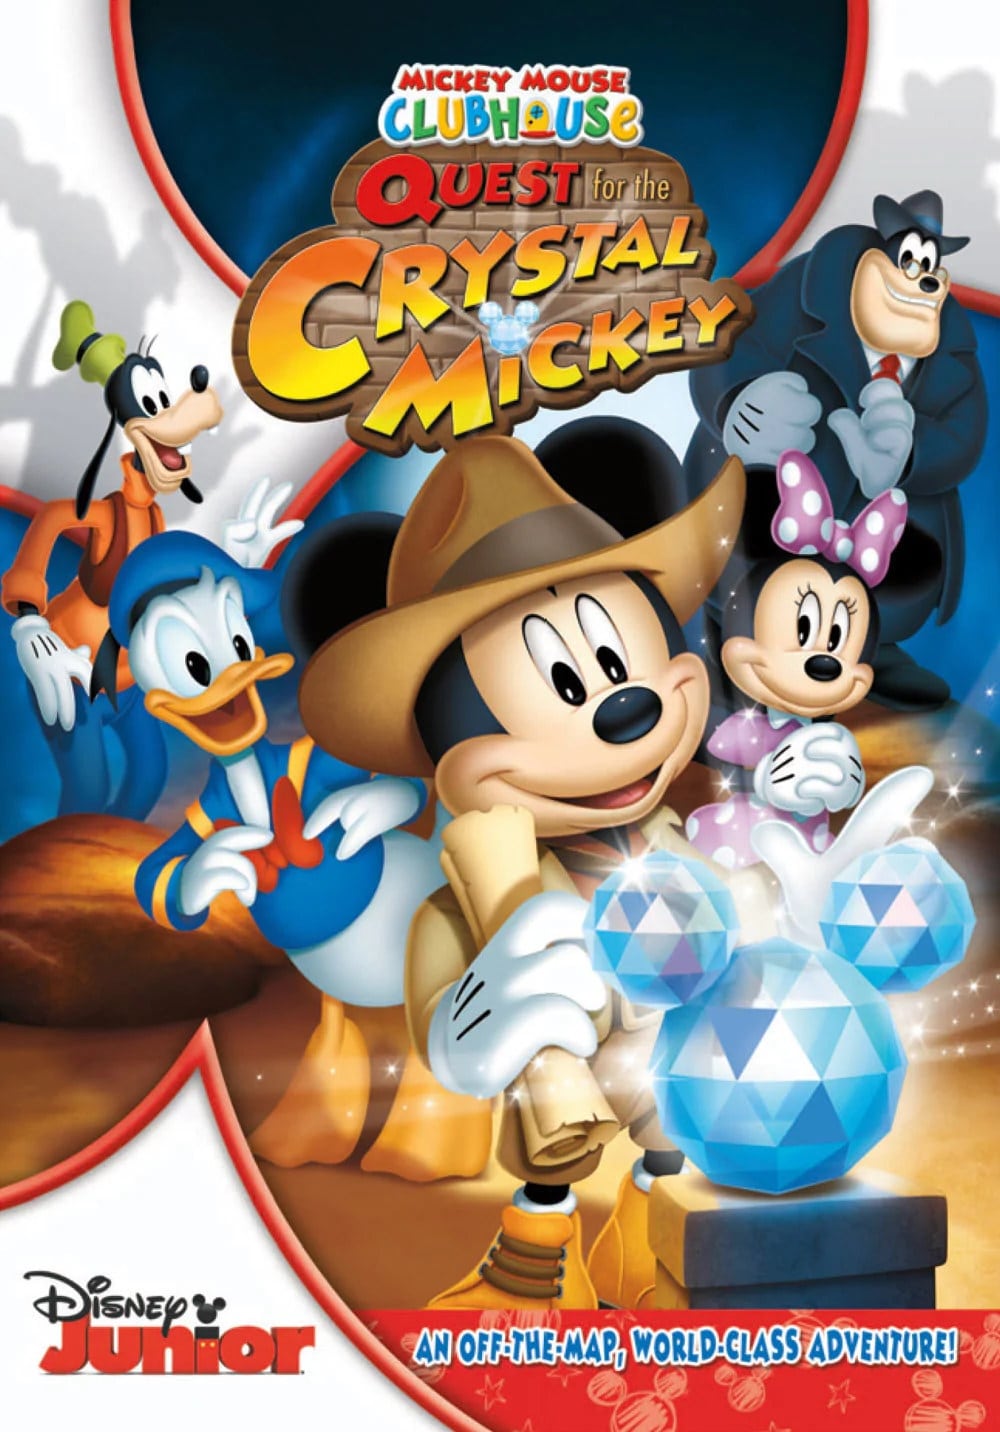 Mickey Mouse Clubhouse: Quest for the Crystal Mickey - World Class Adventure!